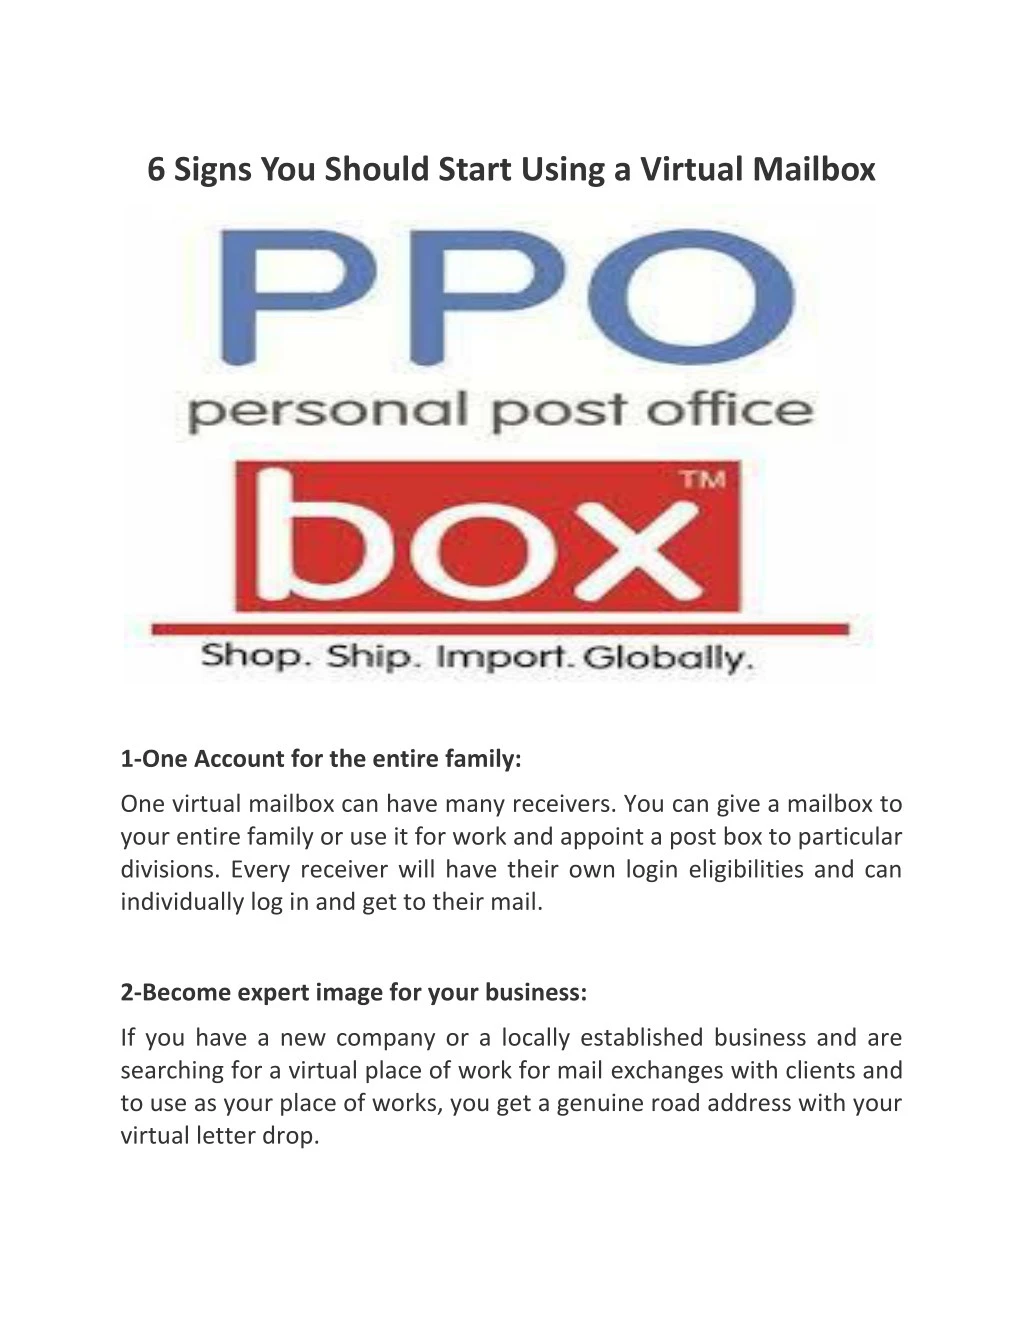 6 signs you should start using a virtual mailbox